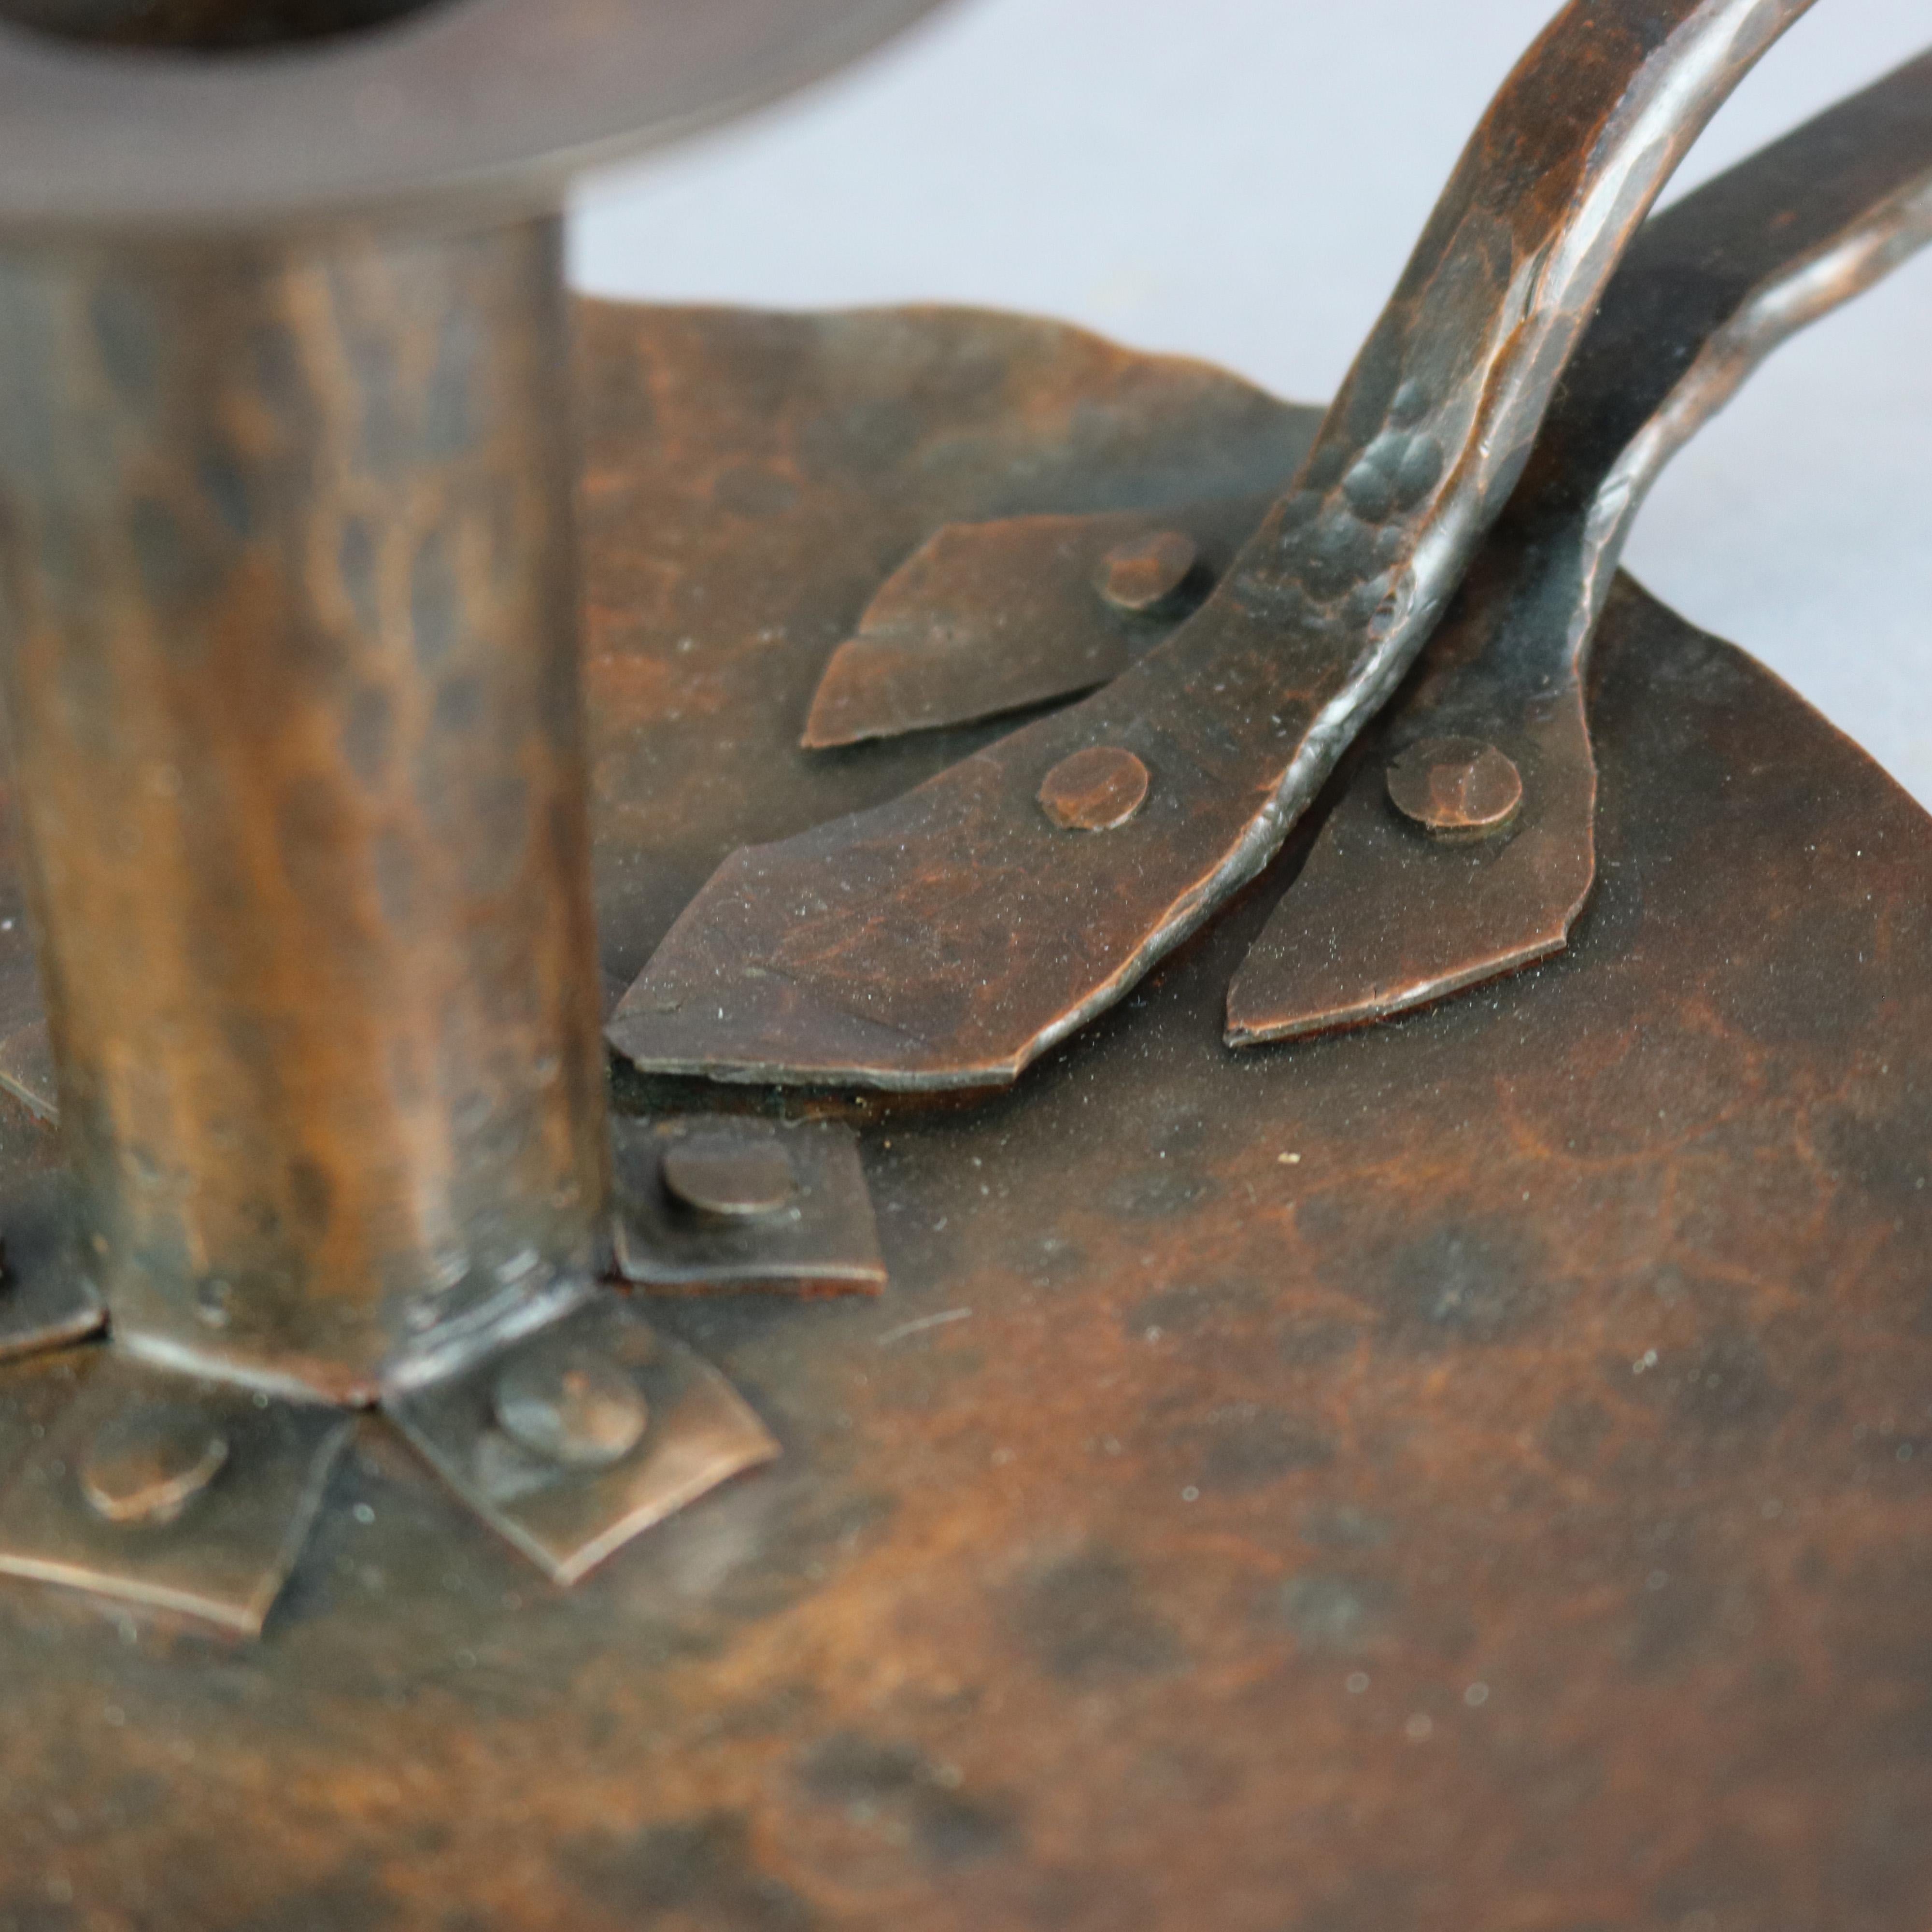 An antique chamber candlestick in the manner of Dirk Van Erp offers hand hammered copper construction with base having well and finger hold, en verso later added windmill stamp as photographed, 20th century.

Measures: 5